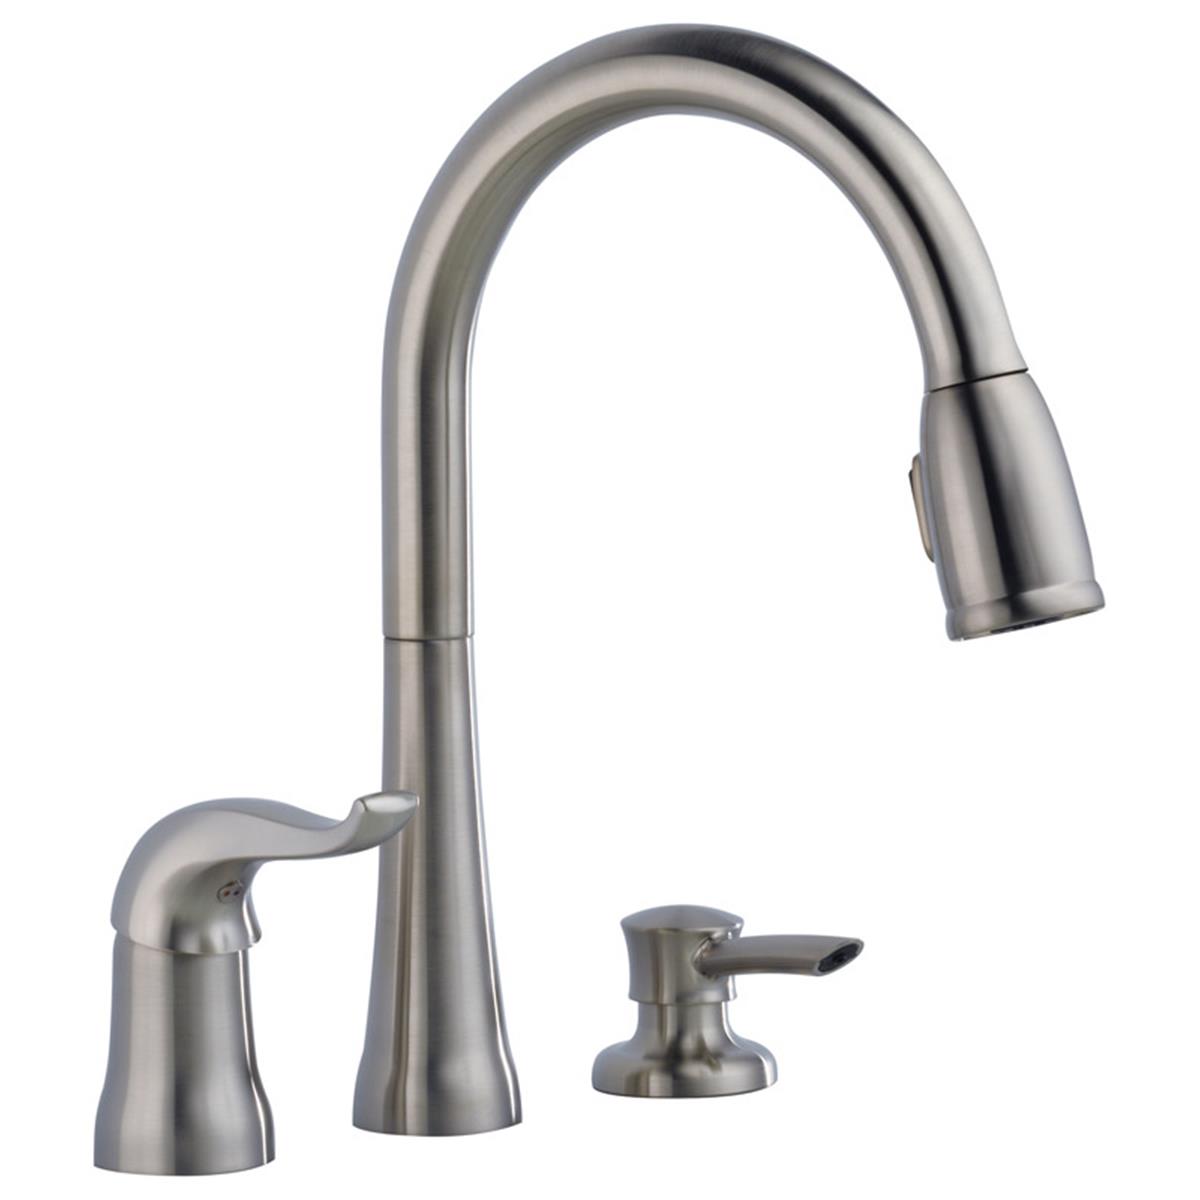 16970-sssd-dst Single Handle Pull-down Kitchen Faucet With Soap Dispenser